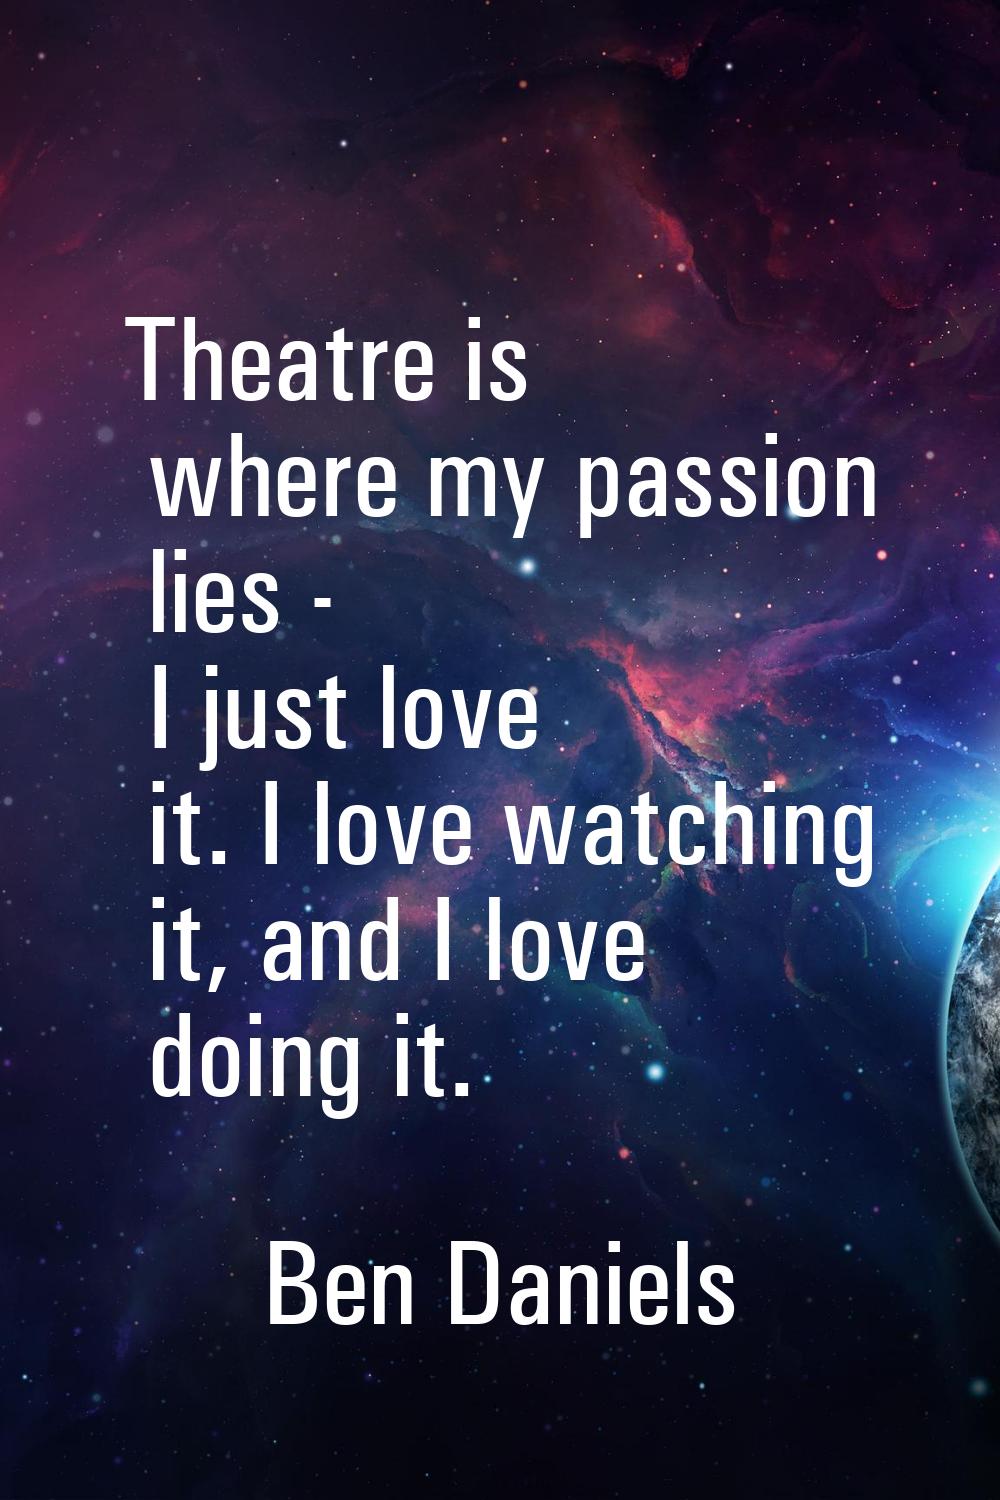 Theatre is where my passion lies - I just love it. I love watching it, and I love doing it.